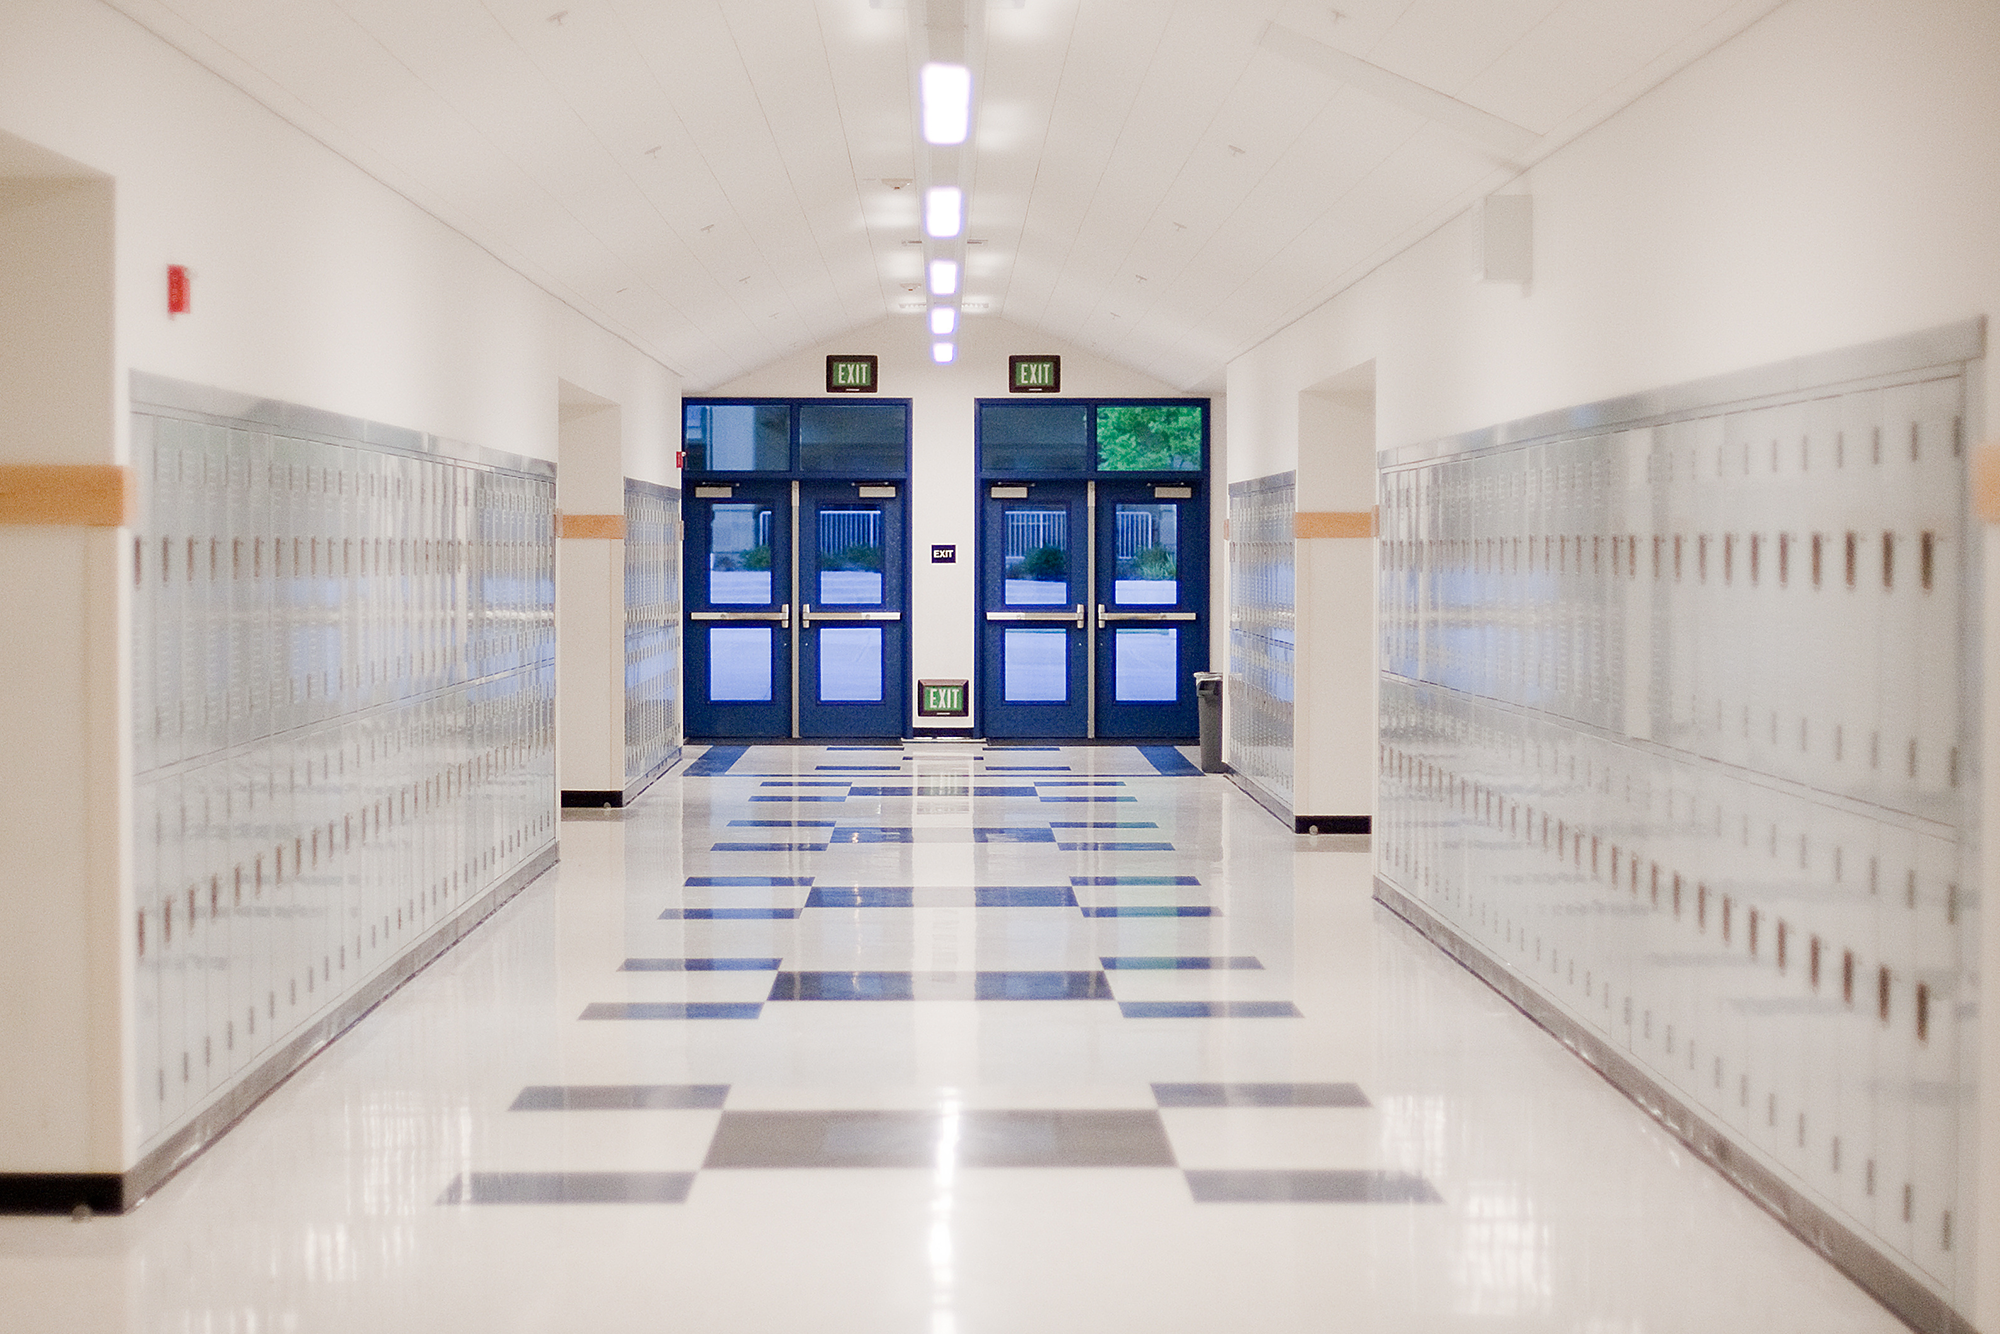 Best Practices for Efficient Claim Reporting and Management: An empty school hallway with lockers on each side and an exit door at the far end.